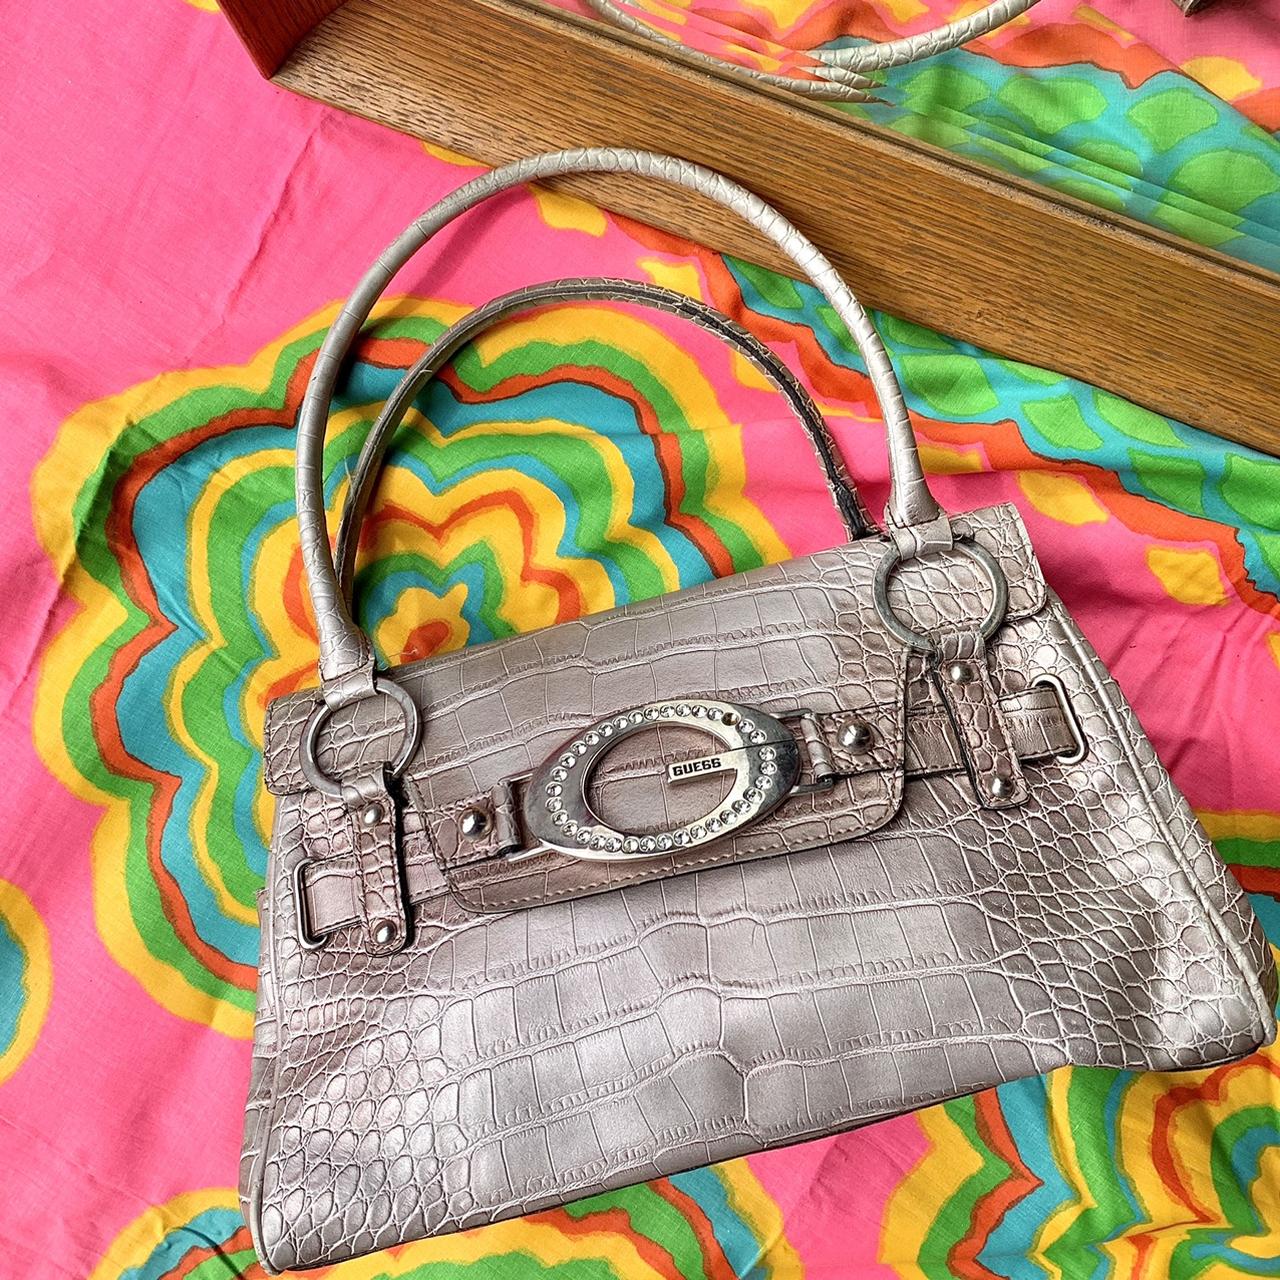 G by Guess brand over the shoulder purse! Patent - Depop